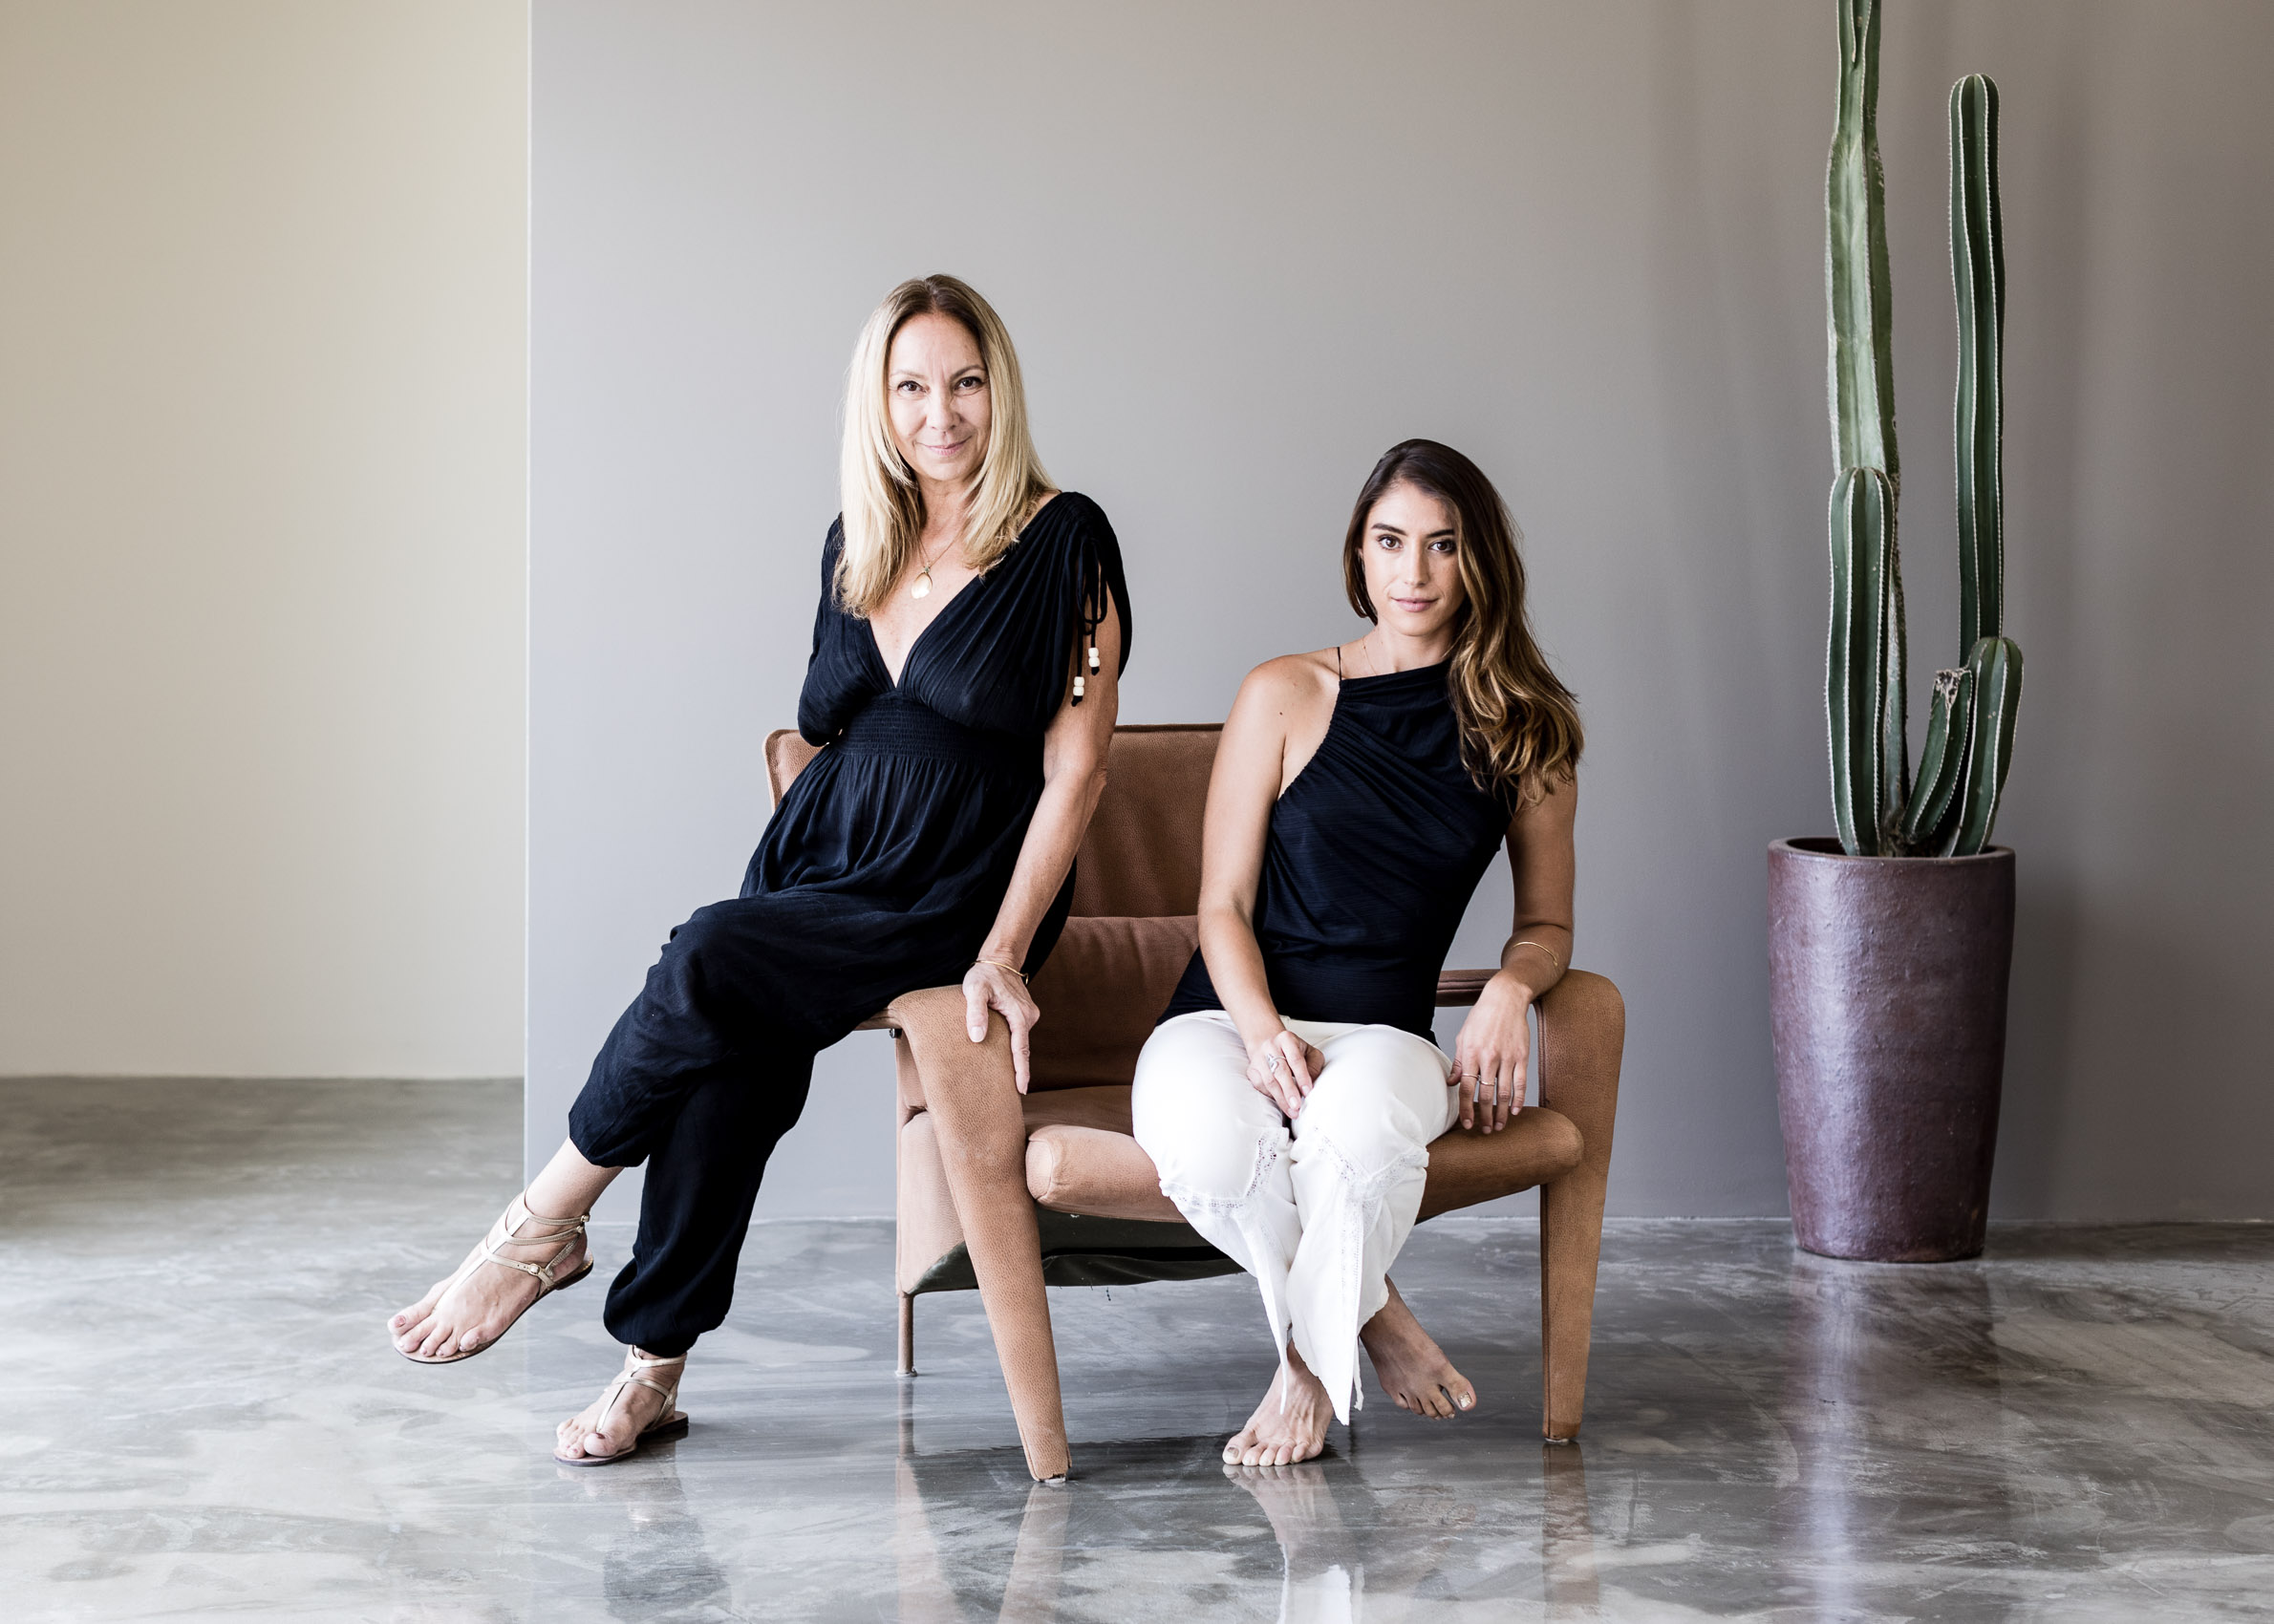 Marina and Avalon Rossi, Avi Ross Group - a design and real estate development team | Los Angeles | Editorial and Commercial Photographer Patrick Strattner